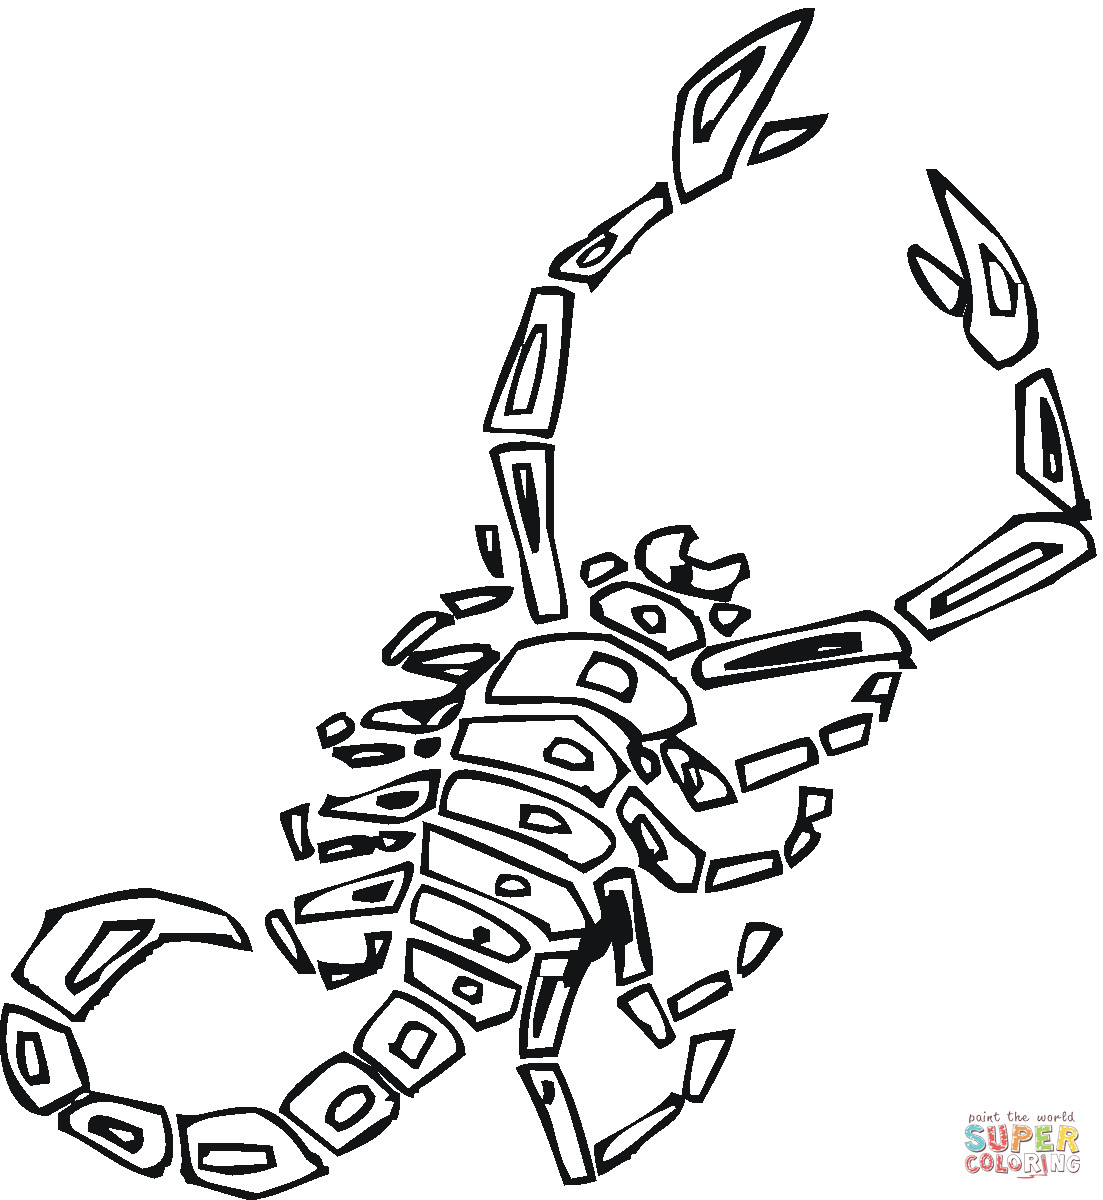 Scorpion Coloring Pages
 Scorpion 3 coloring page